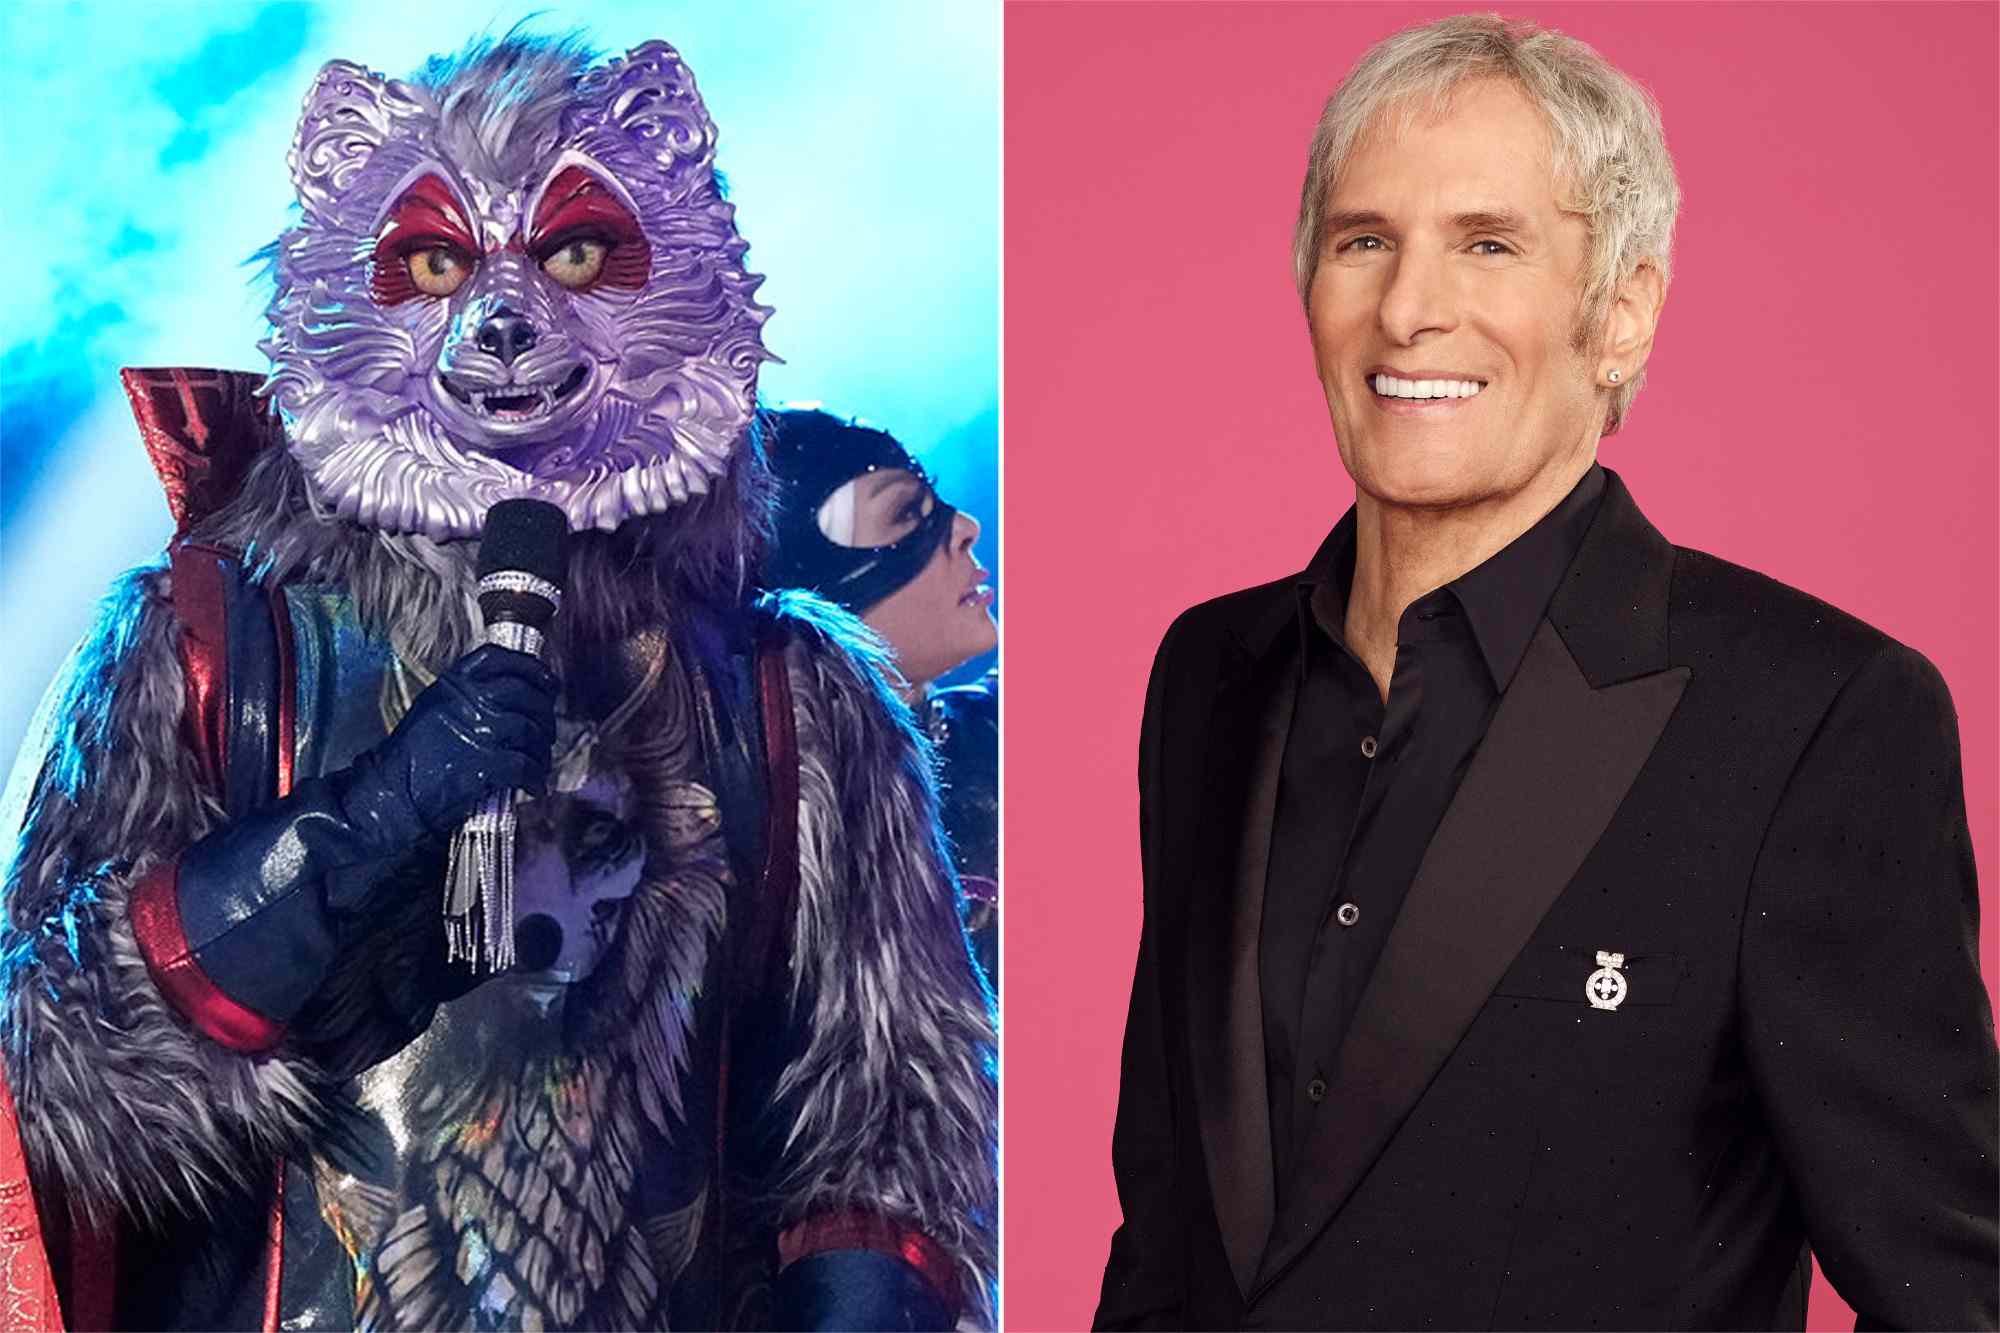 THE MASKED SINGER: Wolf in the “DC Superheroes Night” episode of THE MASKED SINGER airing Wednesday, March 8 (8:00-9:01 PM ET/PT) on FOX, Michael Bolton